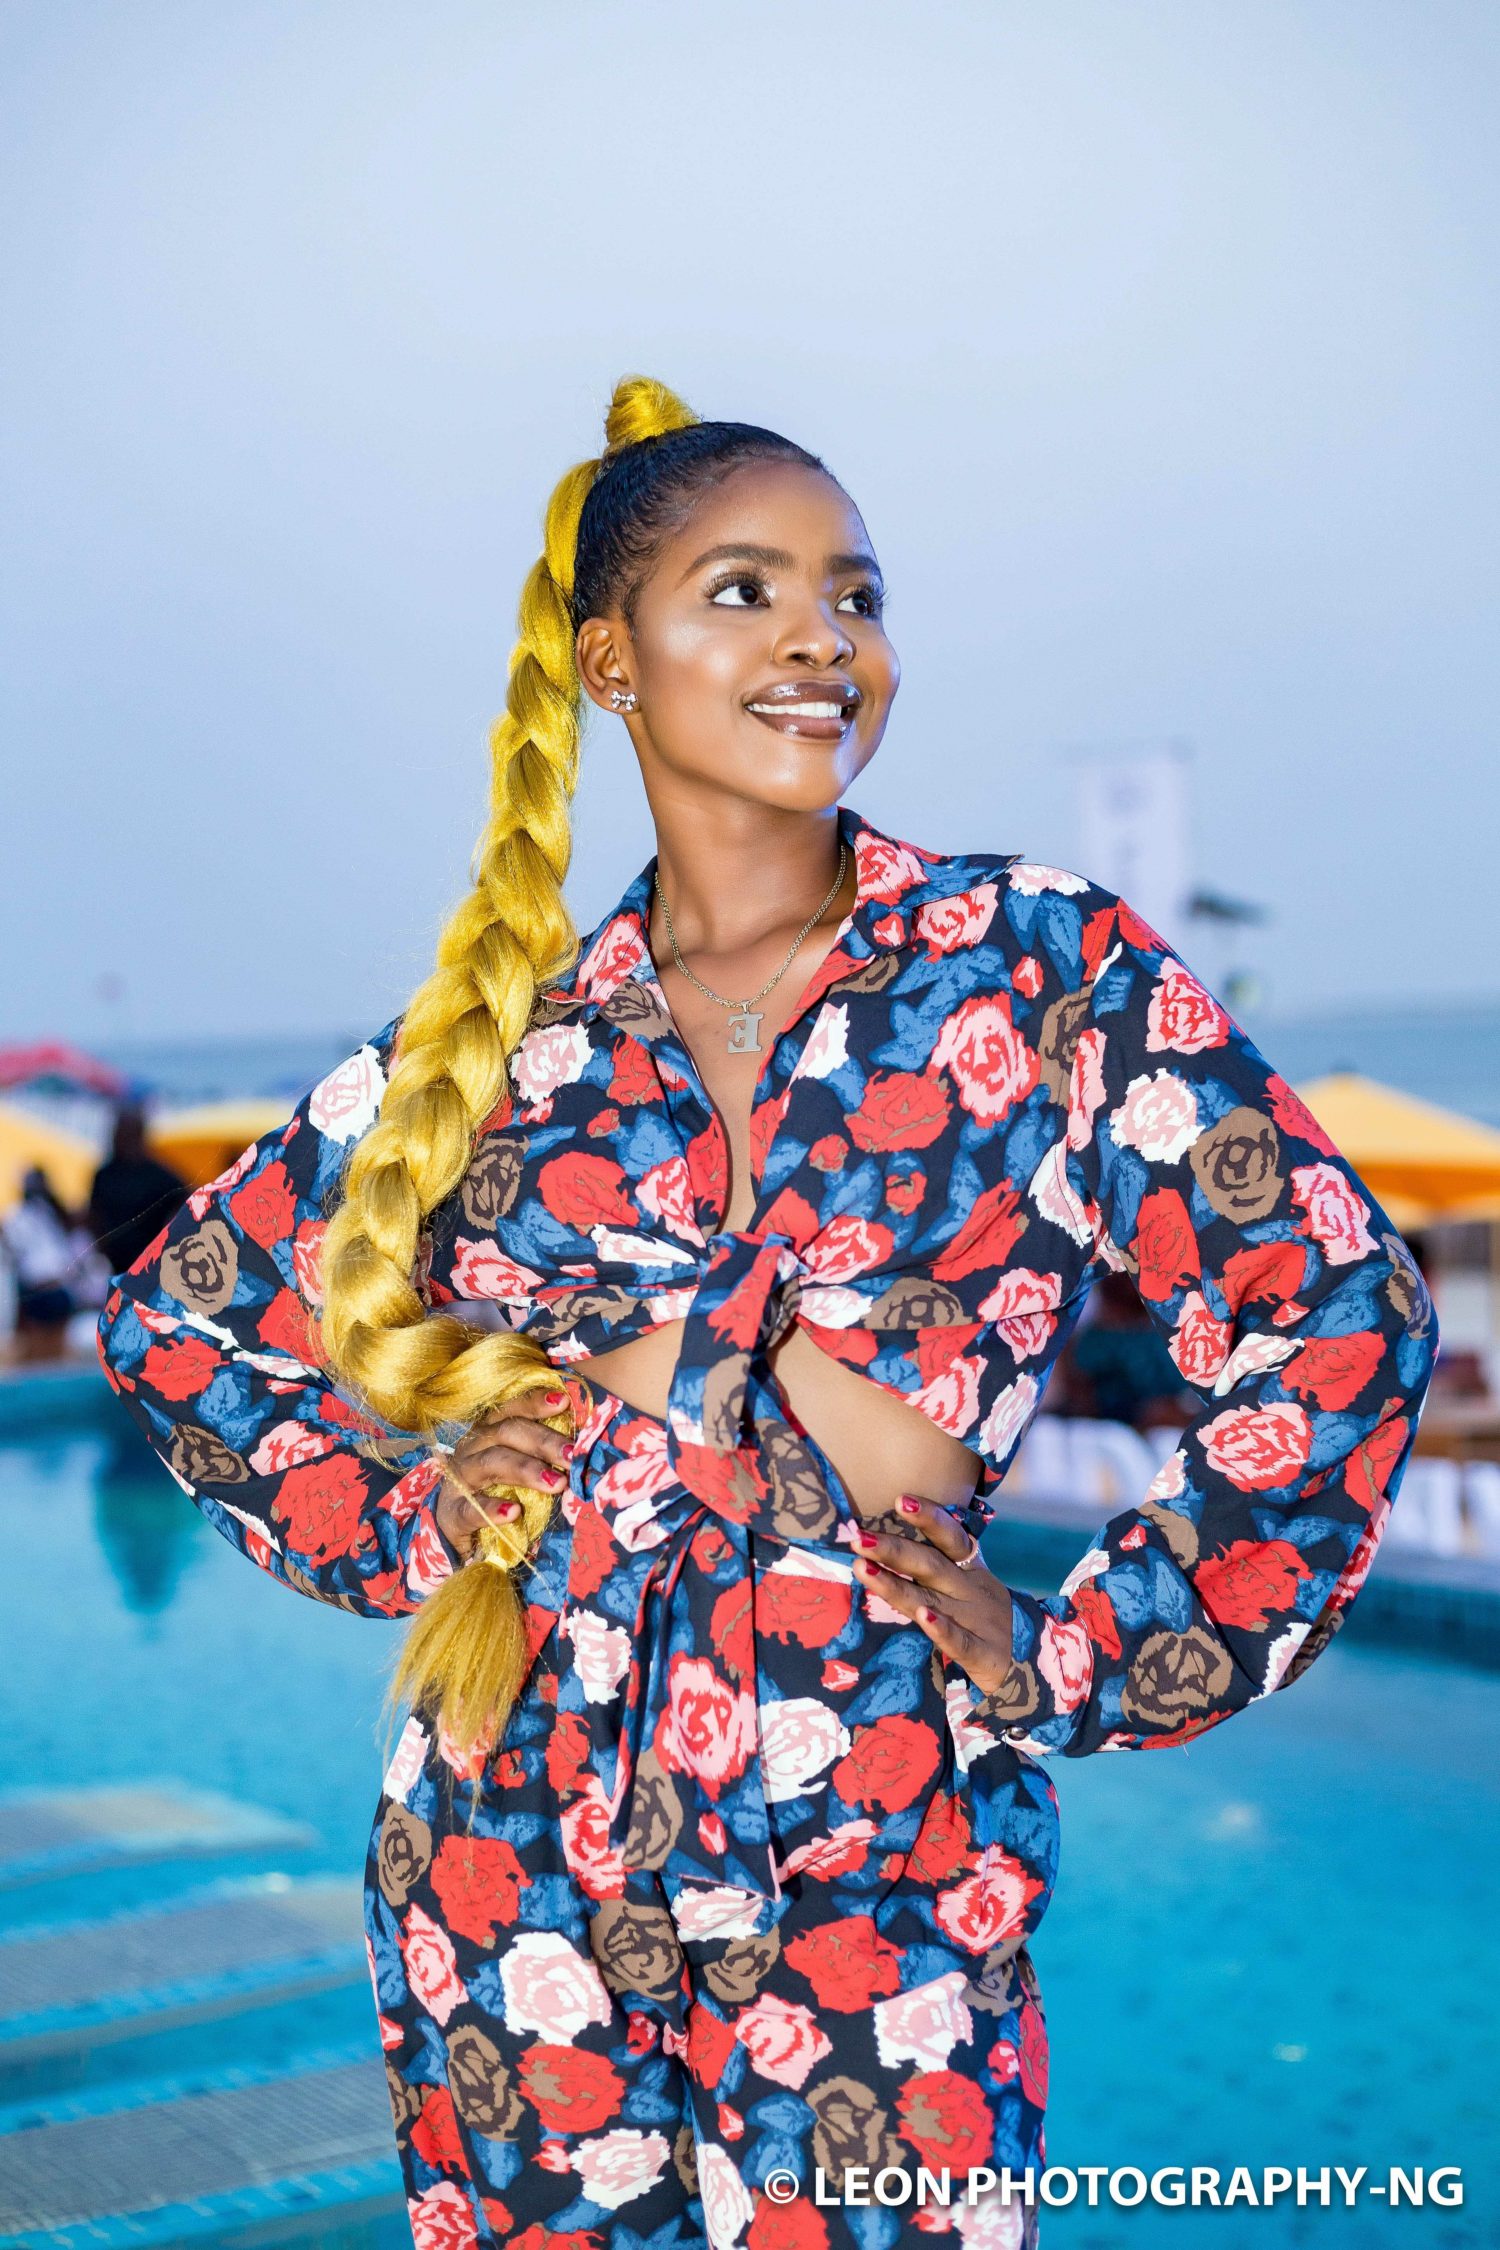 The Funky Brunch Lagos Hosted the Most Lavish Beach Party Last Month! – See Photos